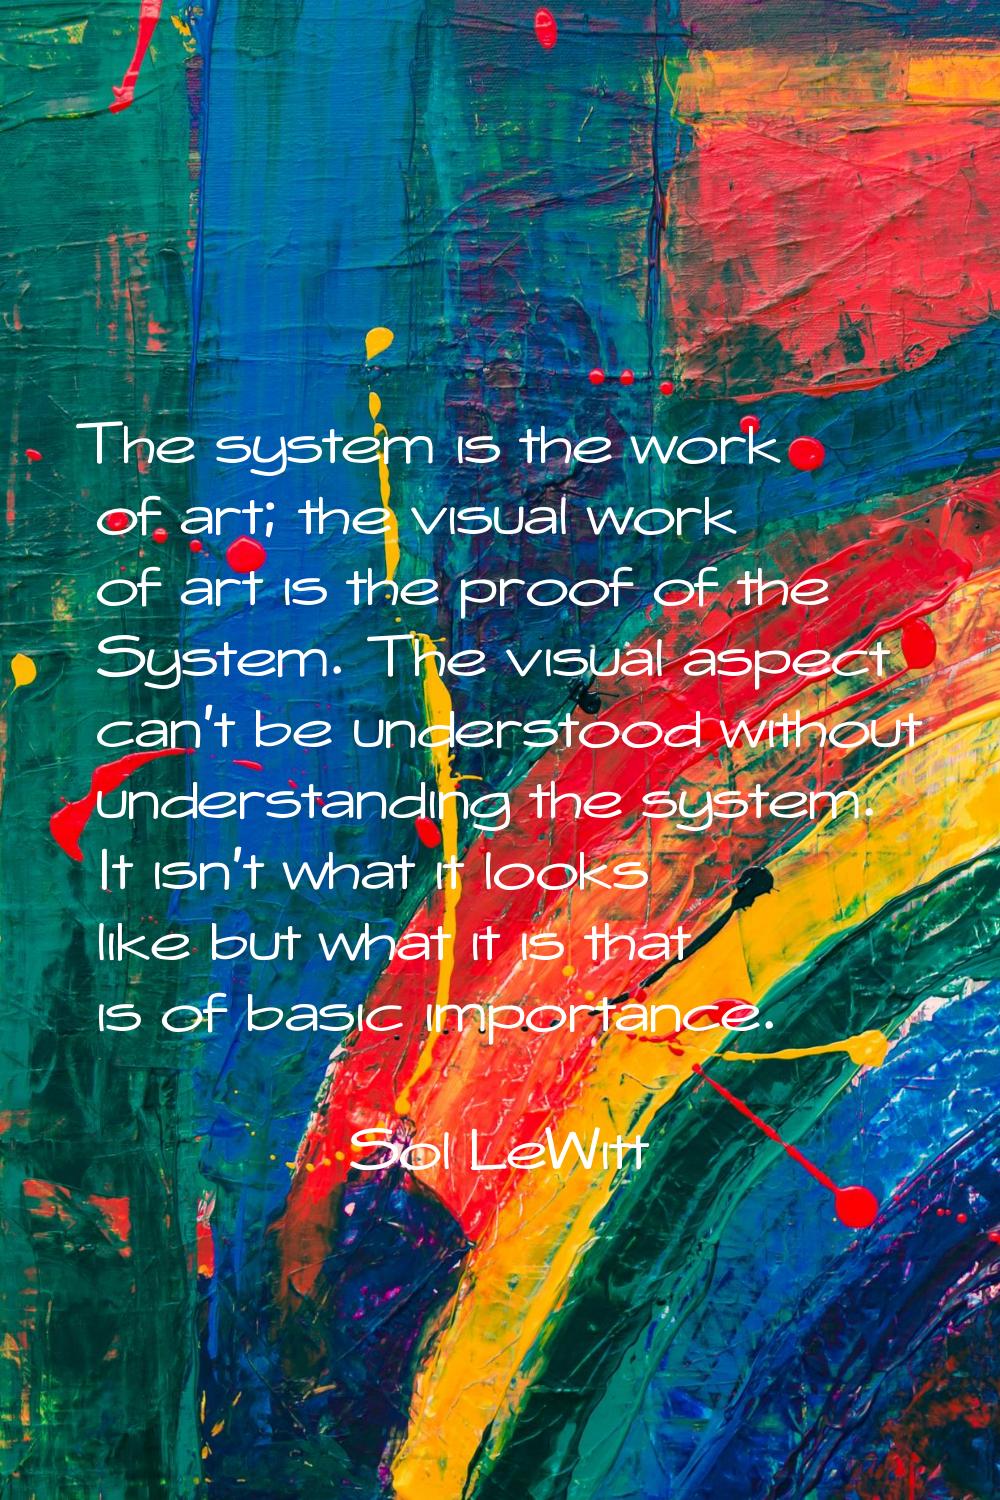 The system is the work of art; the visual work of art is the proof of the System. The visual aspect